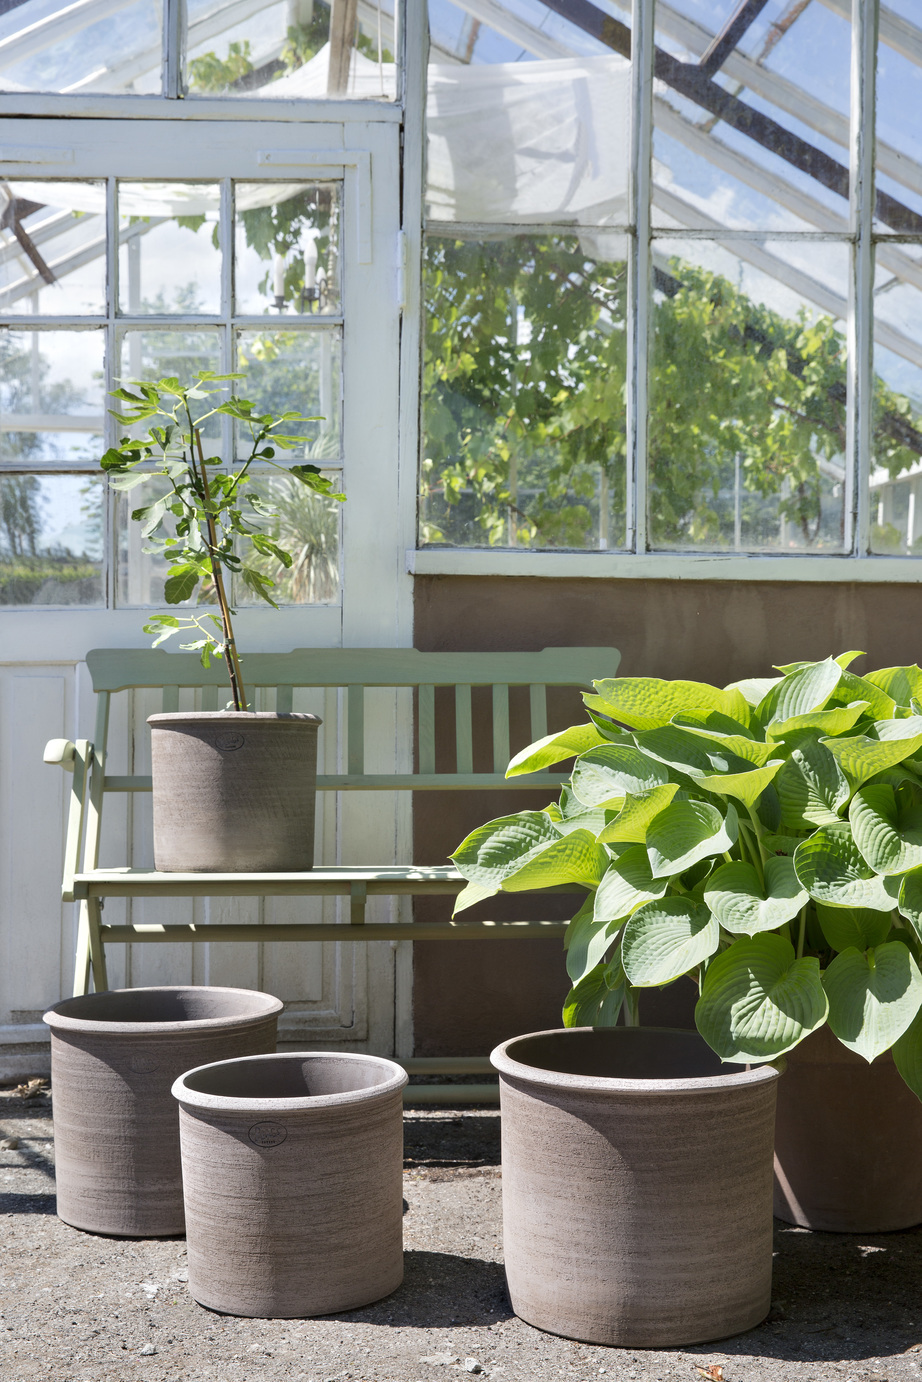 Four raw grey outdoor pots in a greenhouse.